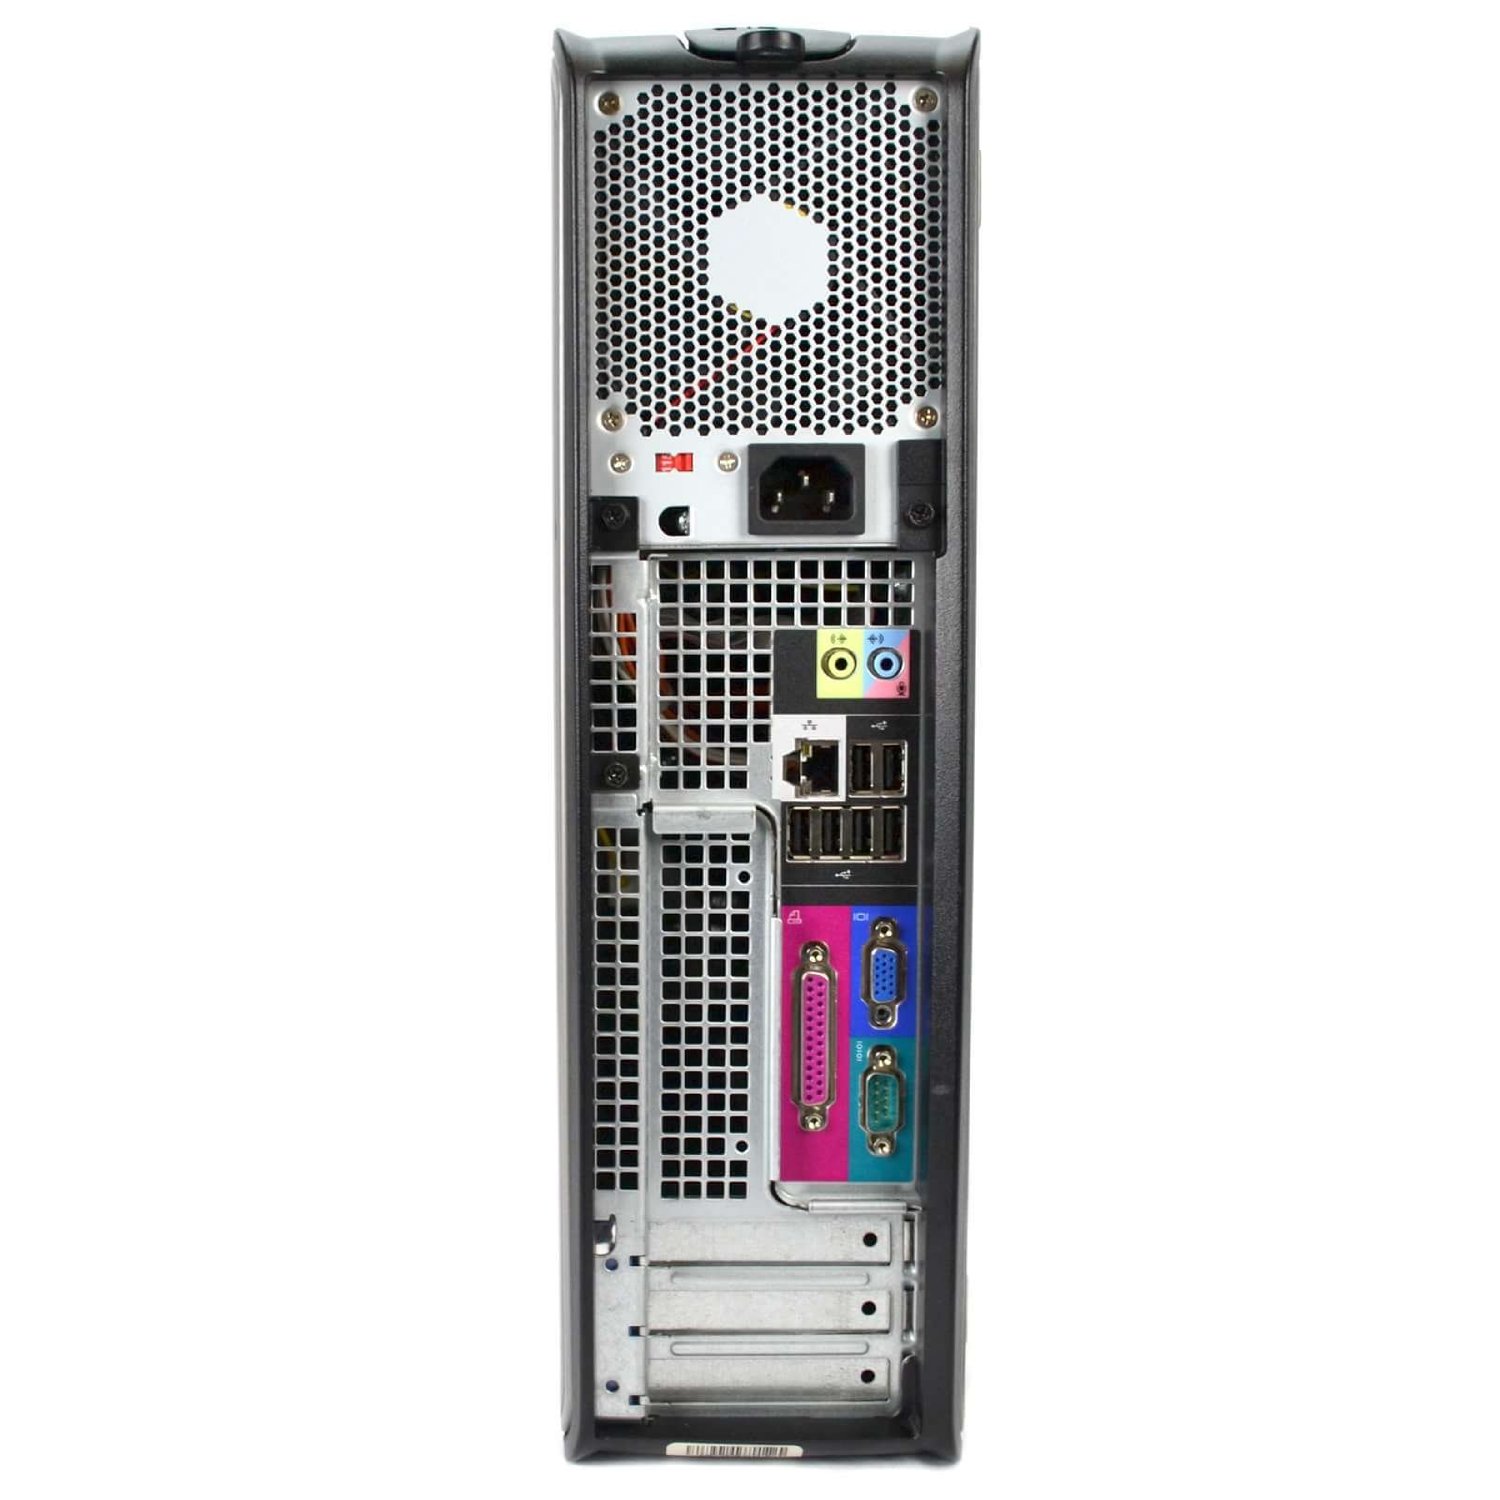 Restored DellOptiplex Desktop Computer 2.5 GHz Core 2 Duo Tower PC, 8GB, 160GB HDD, Windows 10 x64, 19" Monitor , USB Mouse & Keyboard (Refurbished) - image 4 of 4